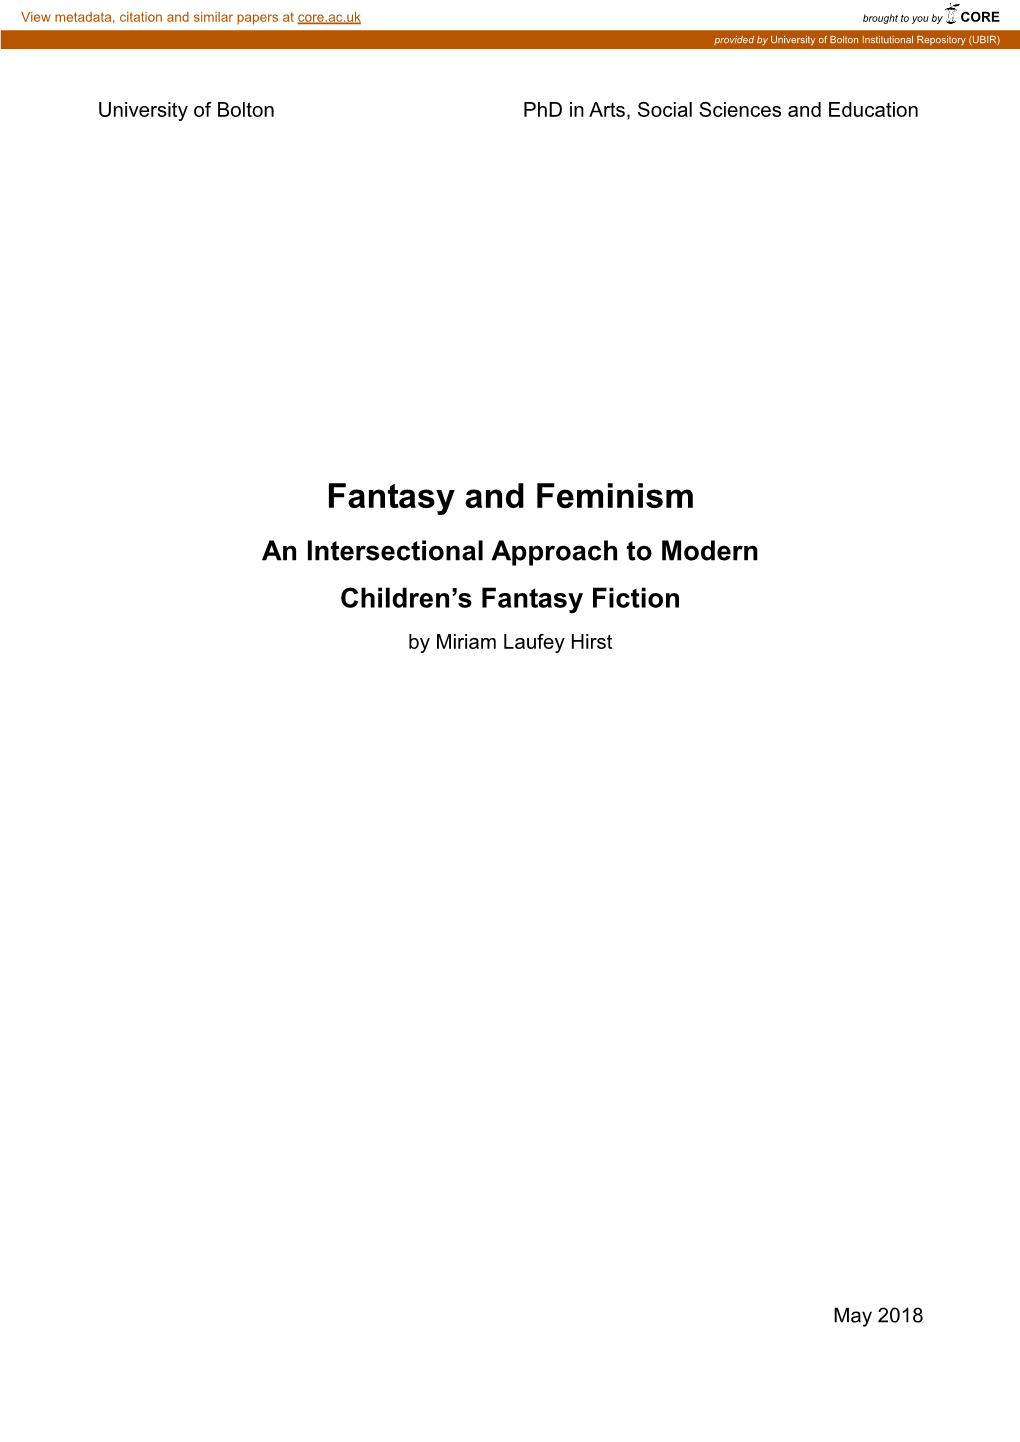 Fantasy and Feminism an Intersectional Approach to Modern